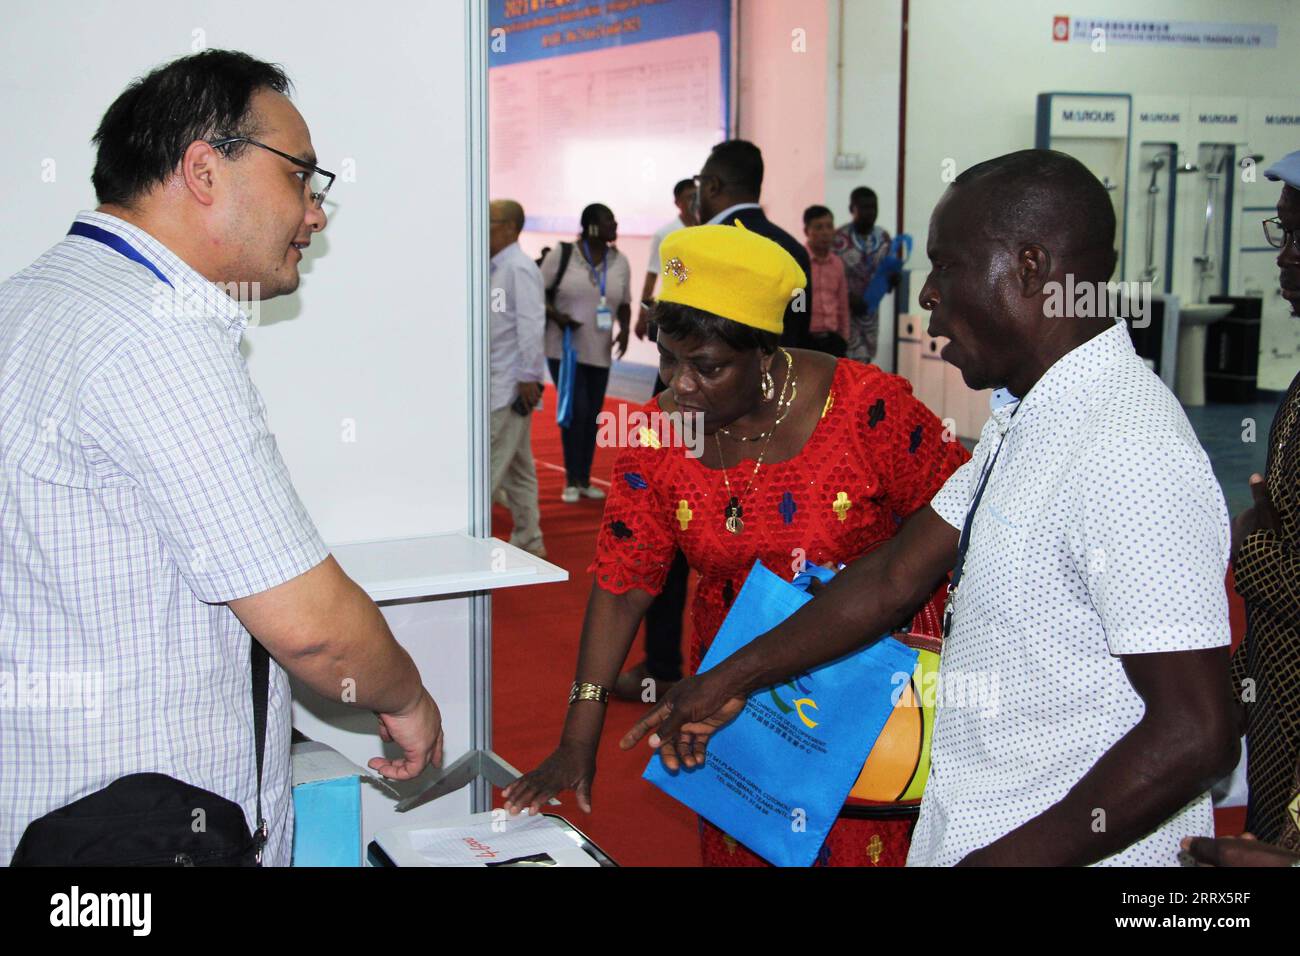 230822 -- COTONOU, Aug. 22, 2023 -- People visit the 13th edition of the Chinese Products Fair in Cotonou, Benin, Aug. 21, 2023. The 13th edition of the Chinese Products Fair opened in Cotonou, Benin s economic capital, Monday. About 100 stands representing more than 40 Chinese exhibitors are showcasing their products in exhibition space covering 2,500 square meters. The products on display include home appliances, electronics and digital items, machinery and accessories, hardware products, building materials and office supplies. Photo by /Xinhua BENIN-COTONOU-CHINESE PRODUCTS FAIR SeraphinxZo Stock Photo